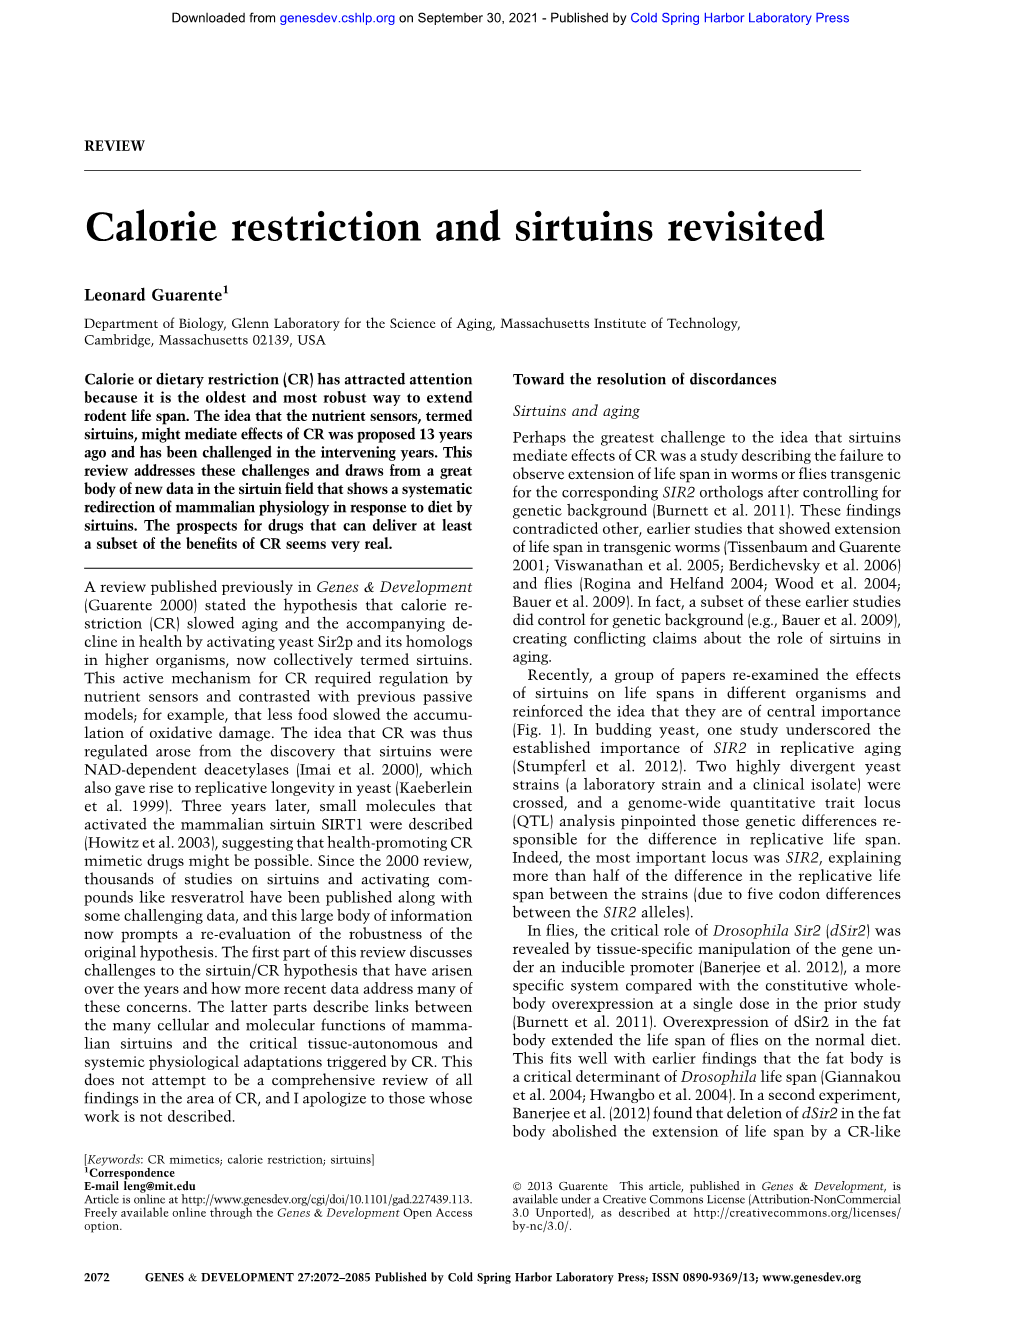 Calorie Restriction and Sirtuins Revisited